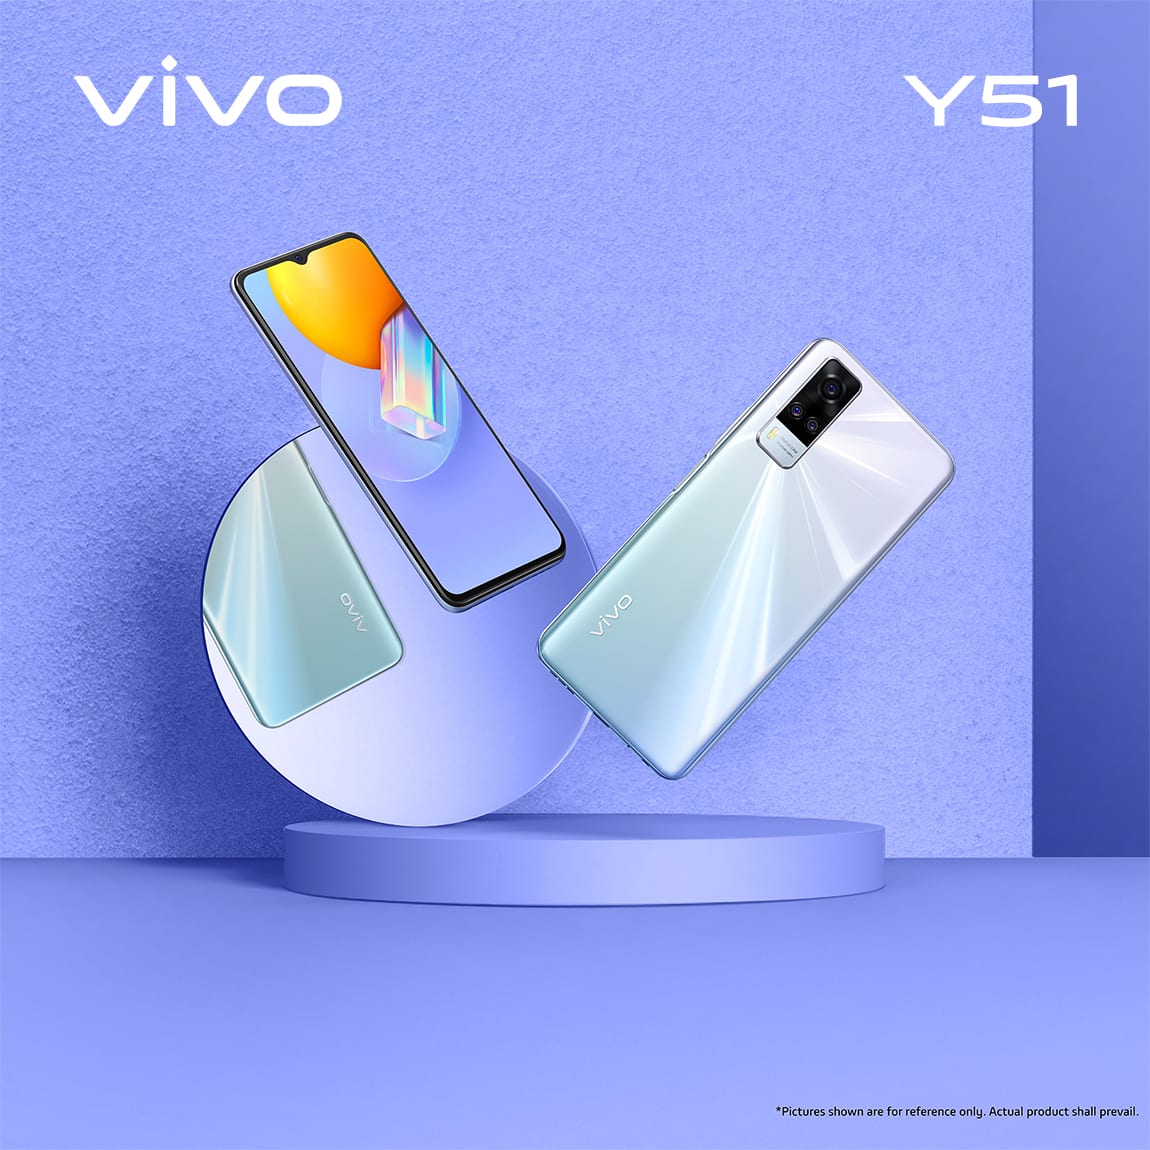 vivo announces the launch of vivo Y51 for the Egyptian market